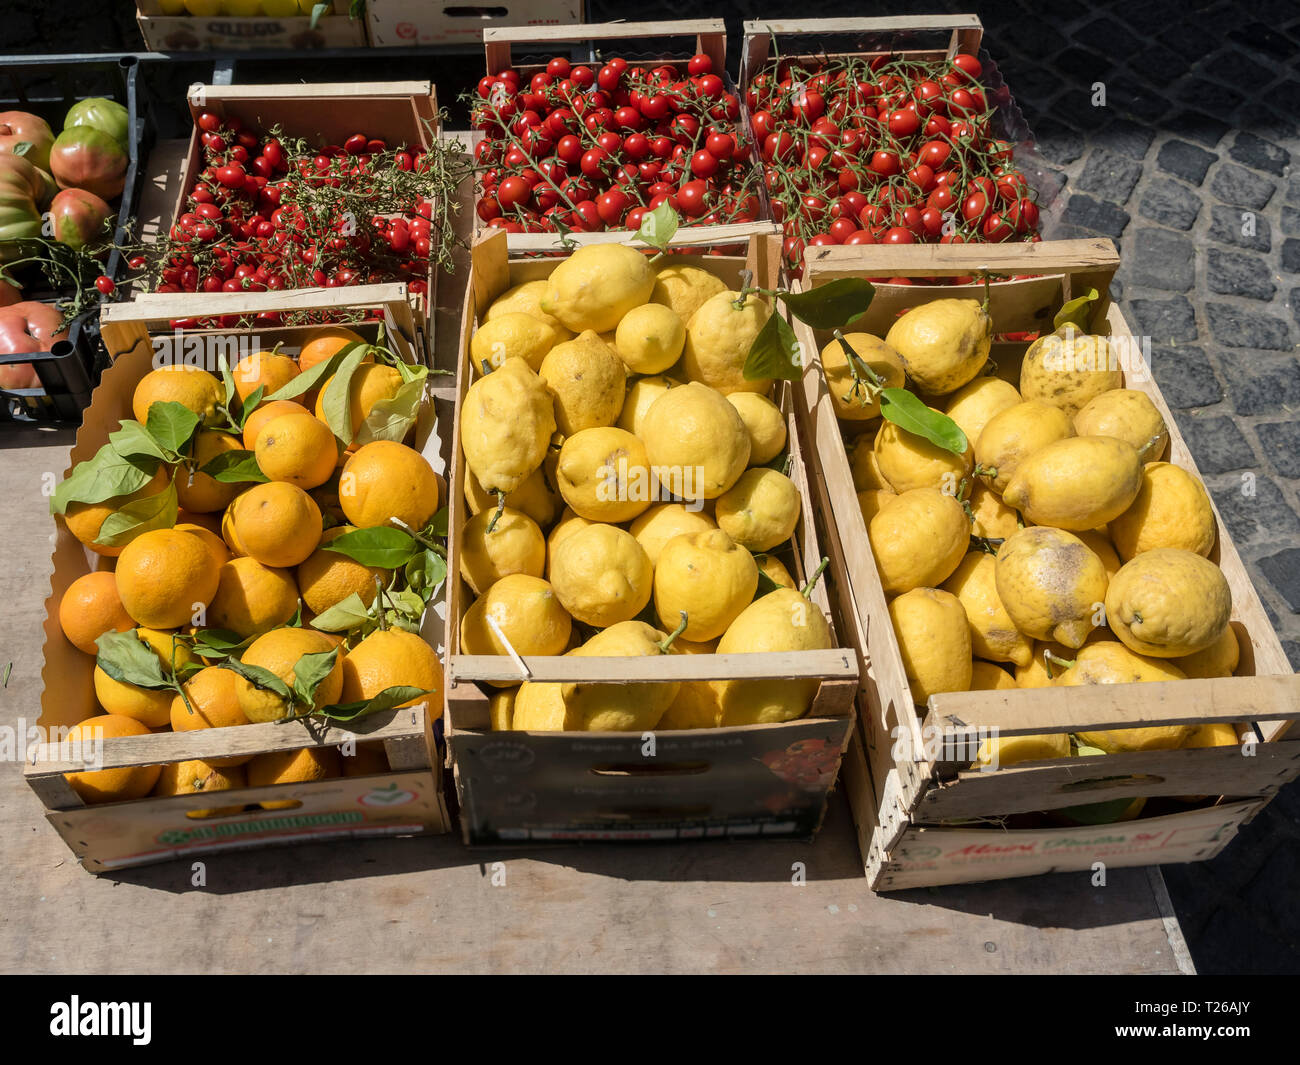 Italy, Ischia, Crates with fresh lemons and tomatoes on Piazza Marina Stock Photo